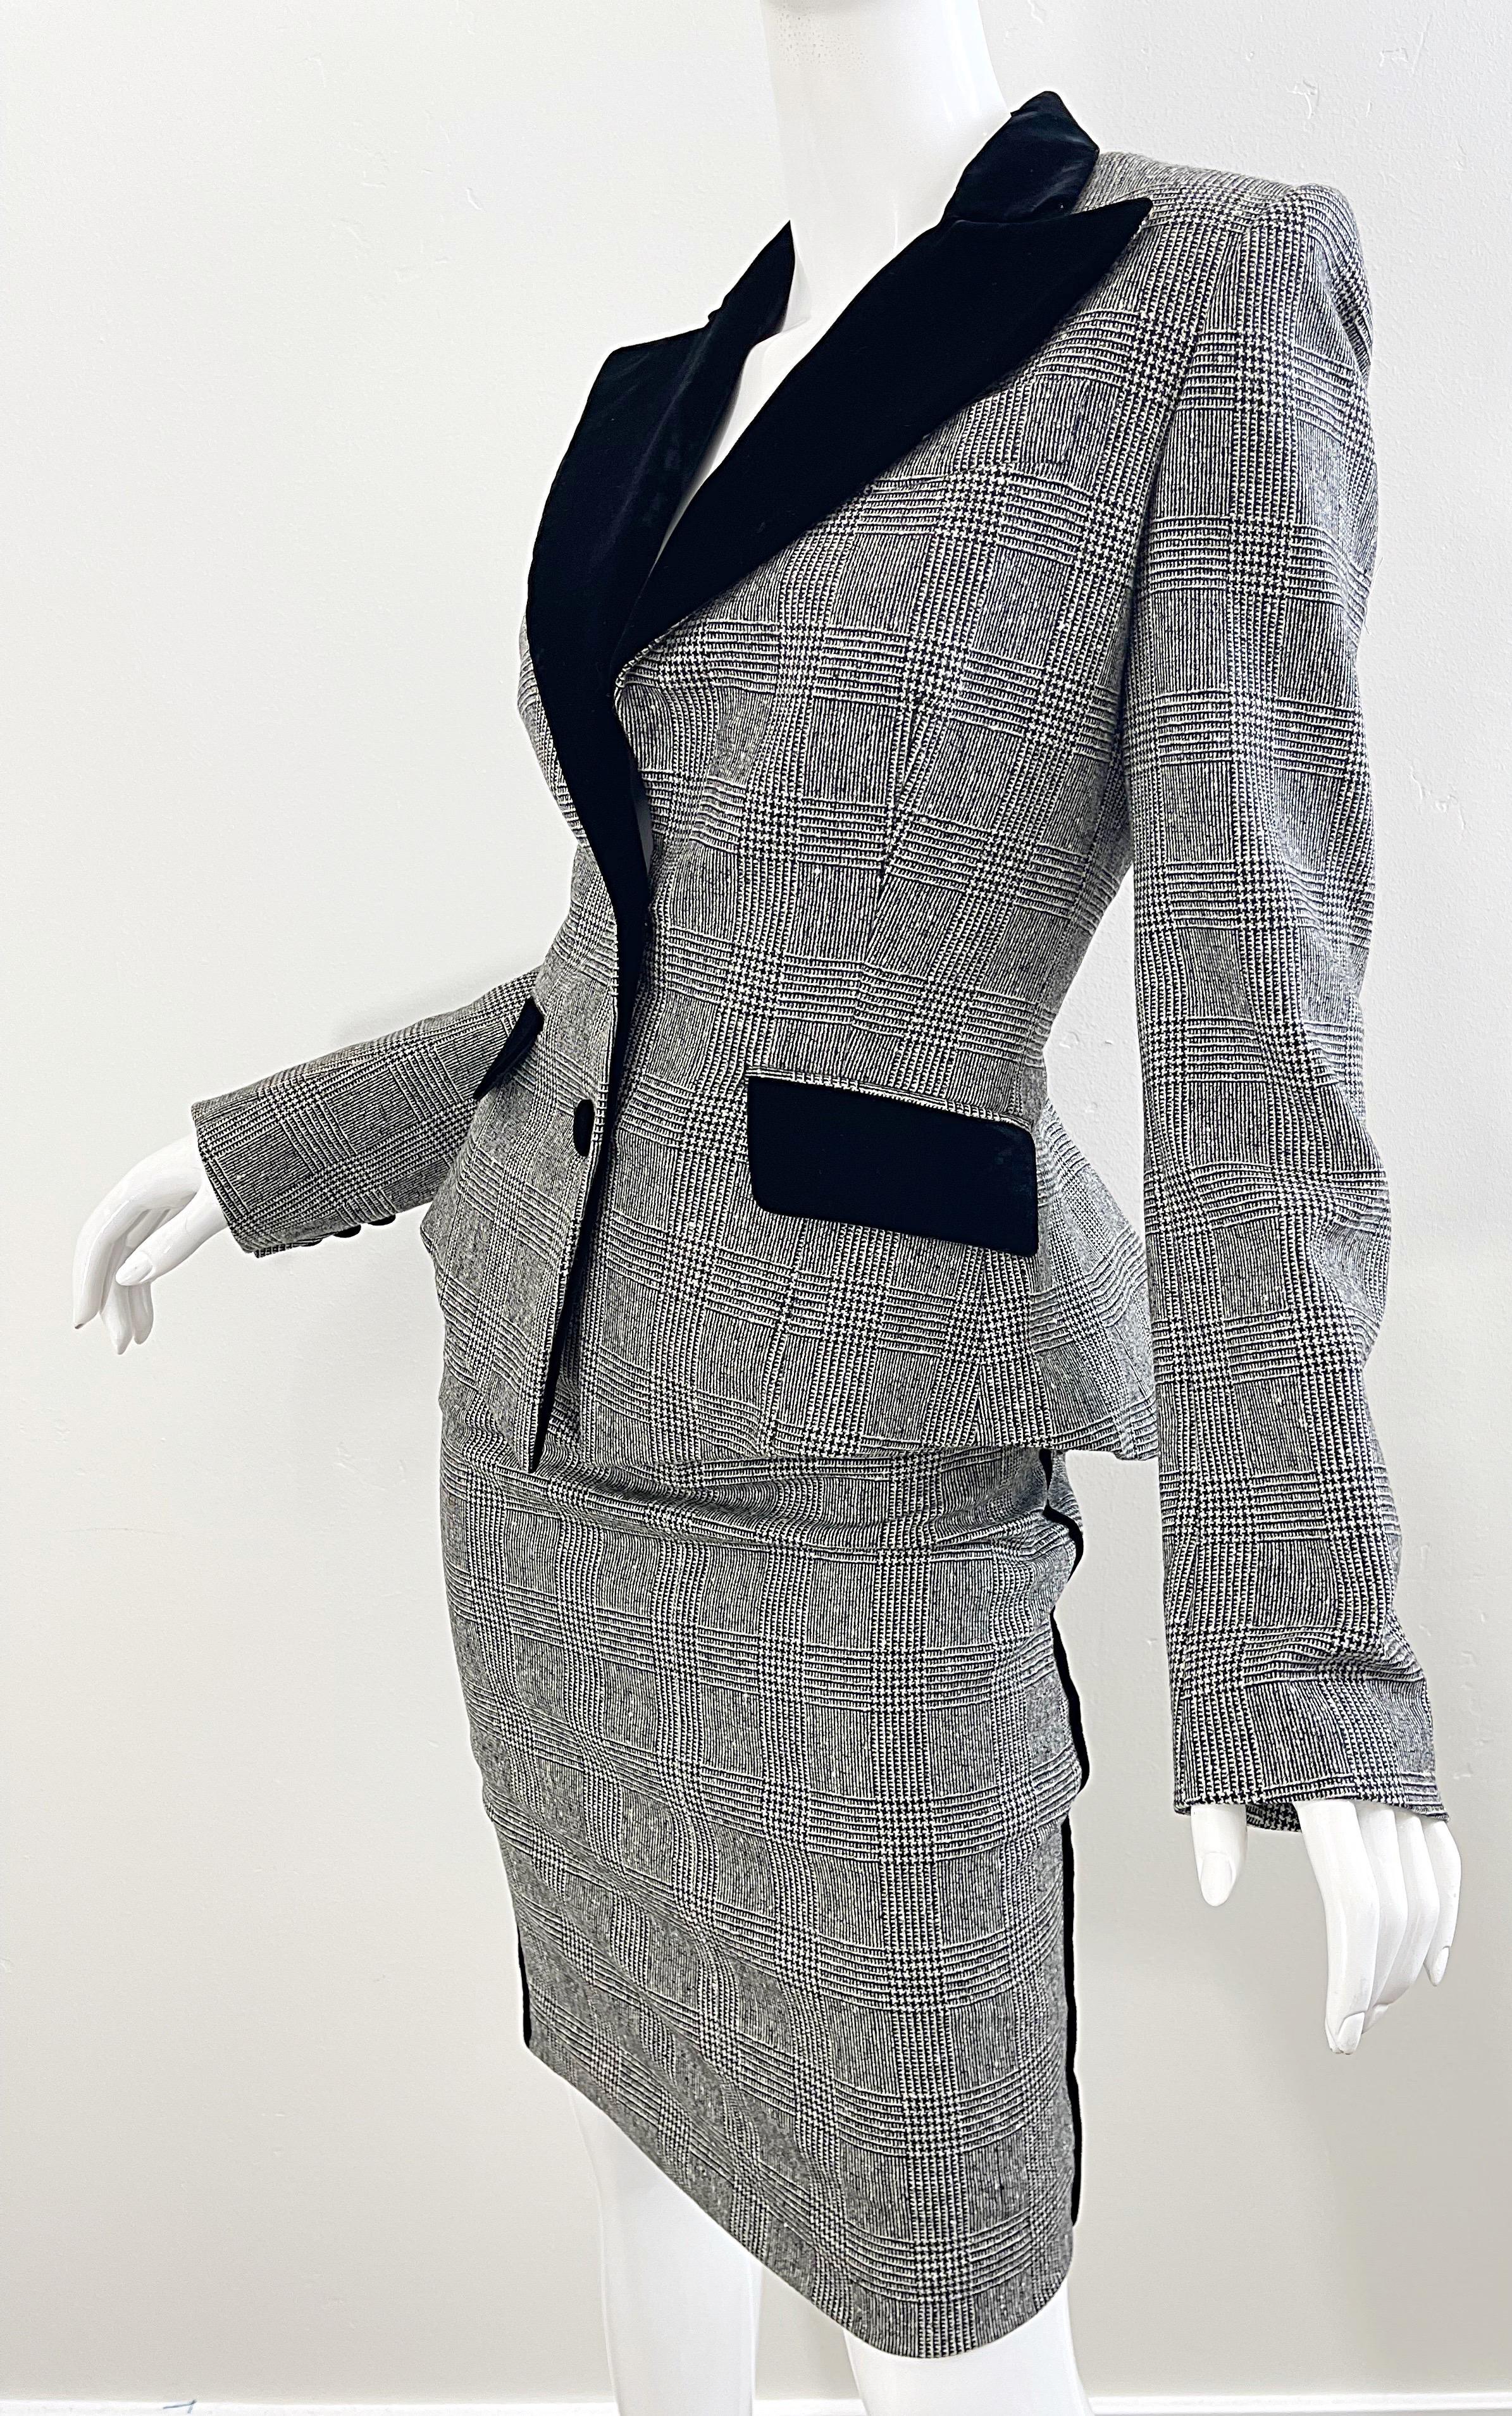 New Roberto Cavalli 2000s Size 42 / 8 Black and White Plaid Skirt Suit Y2K For Sale 3